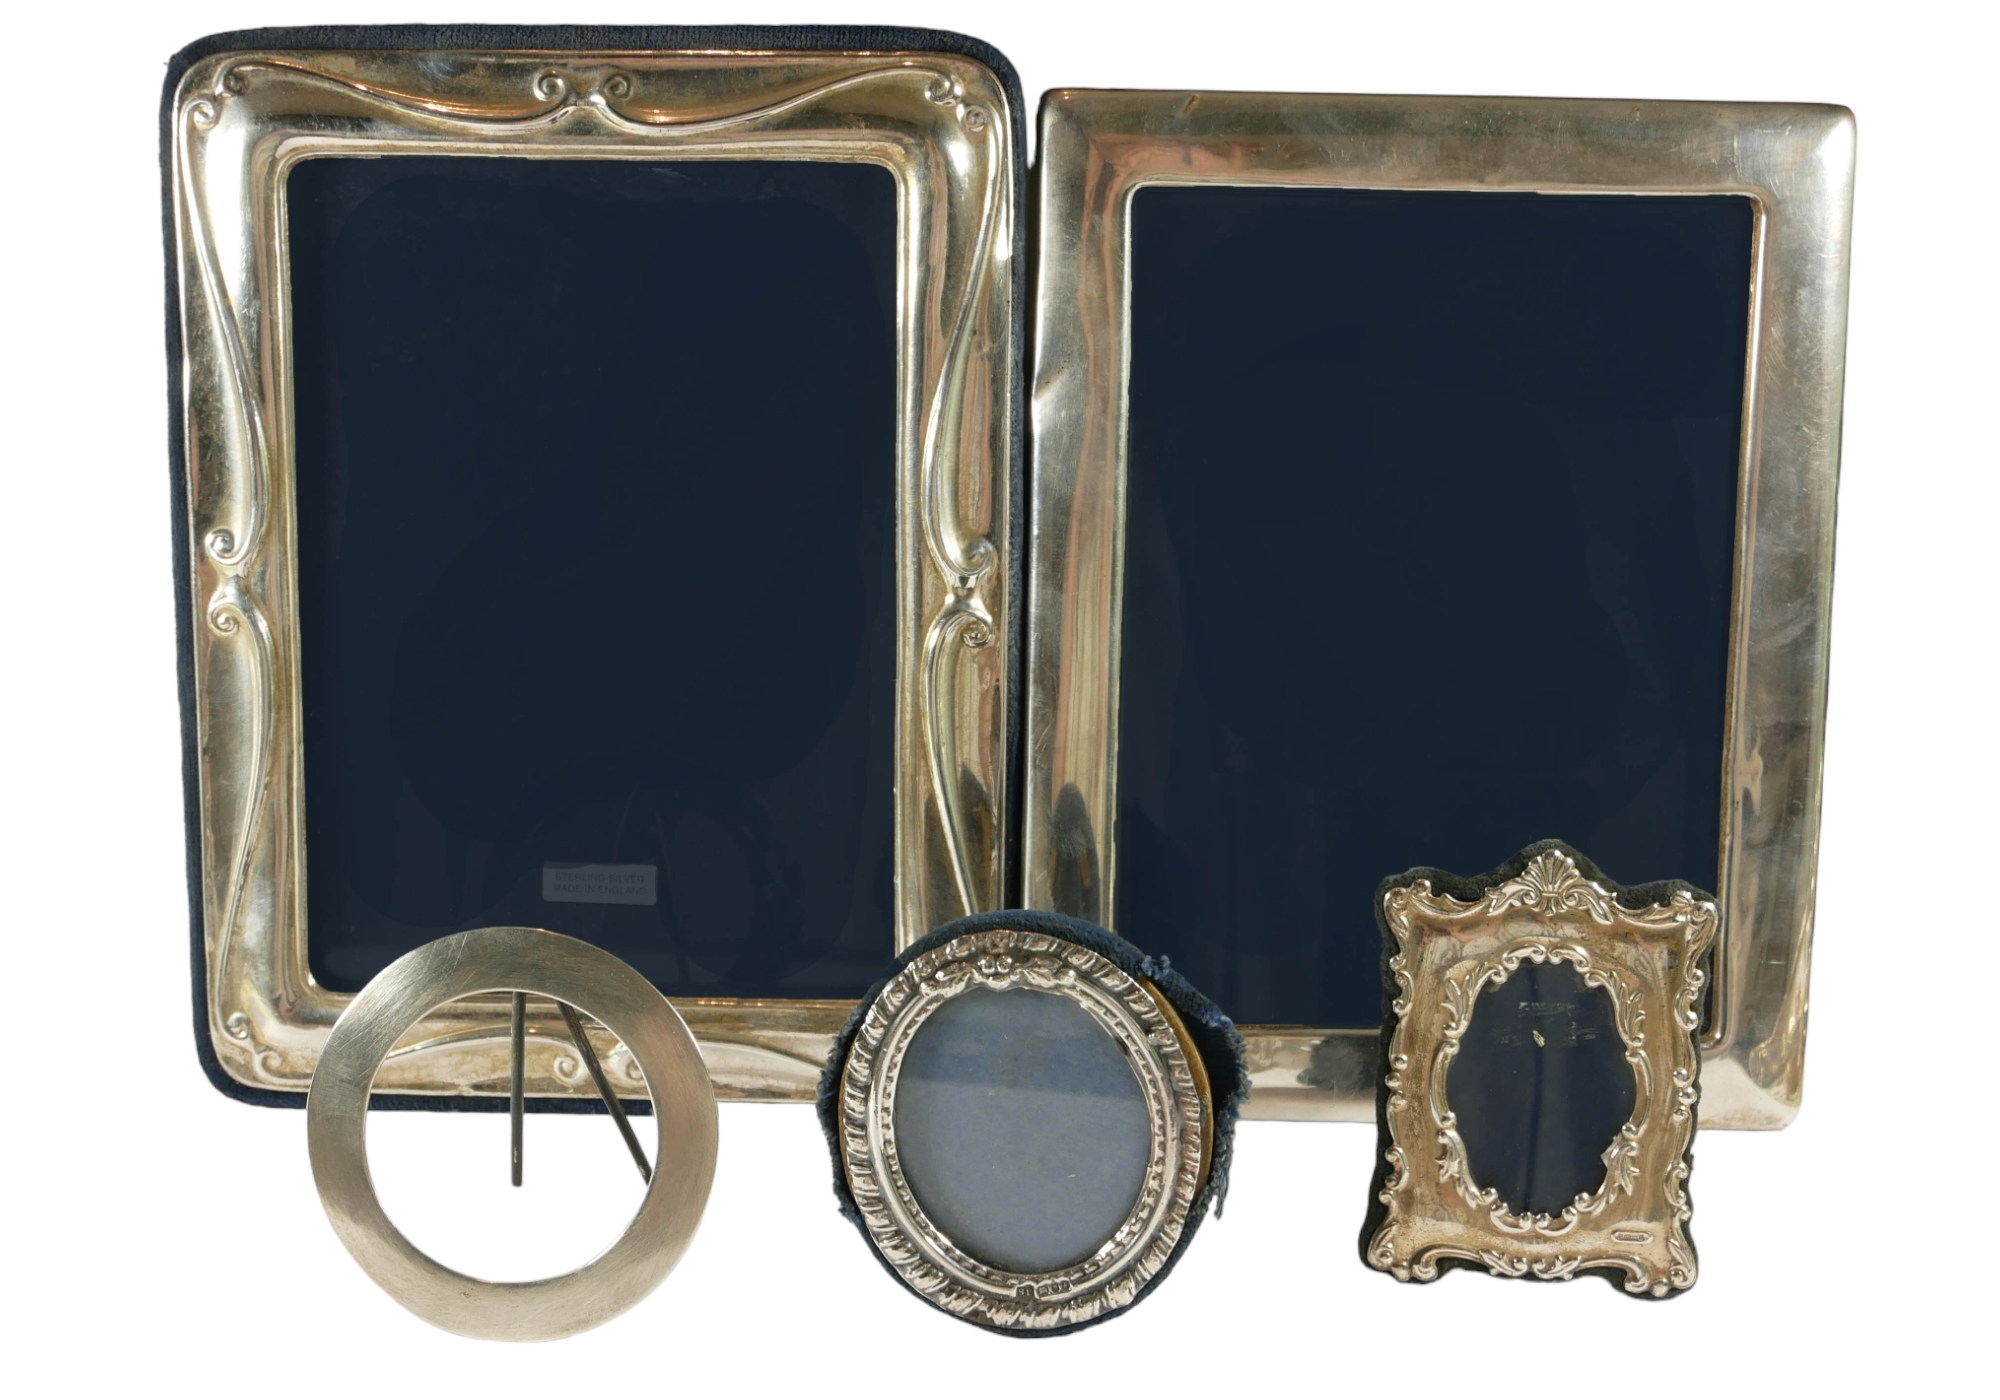 CARRS OF SHEFFIELD, A SILVER PICTURE FRAME TOGETHER WITH TWO LARGE SILVER PICTURE FRAMES AND TWO